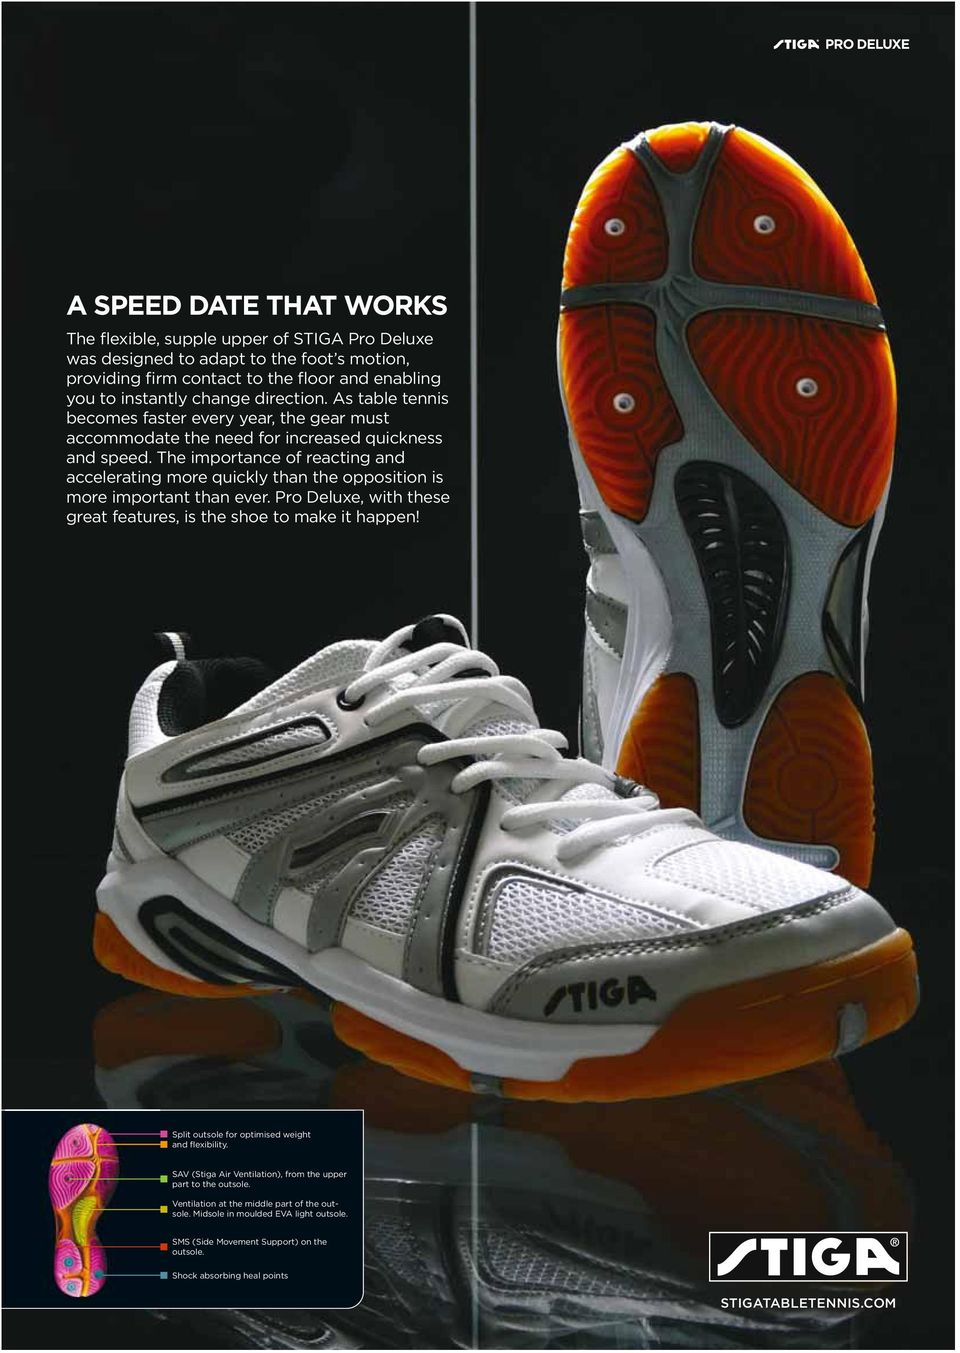 The importance of reacting and accelerating more quickly than the opposition is more important than ever. Pro Deluxe, with these great features, is the shoe to make it happen!